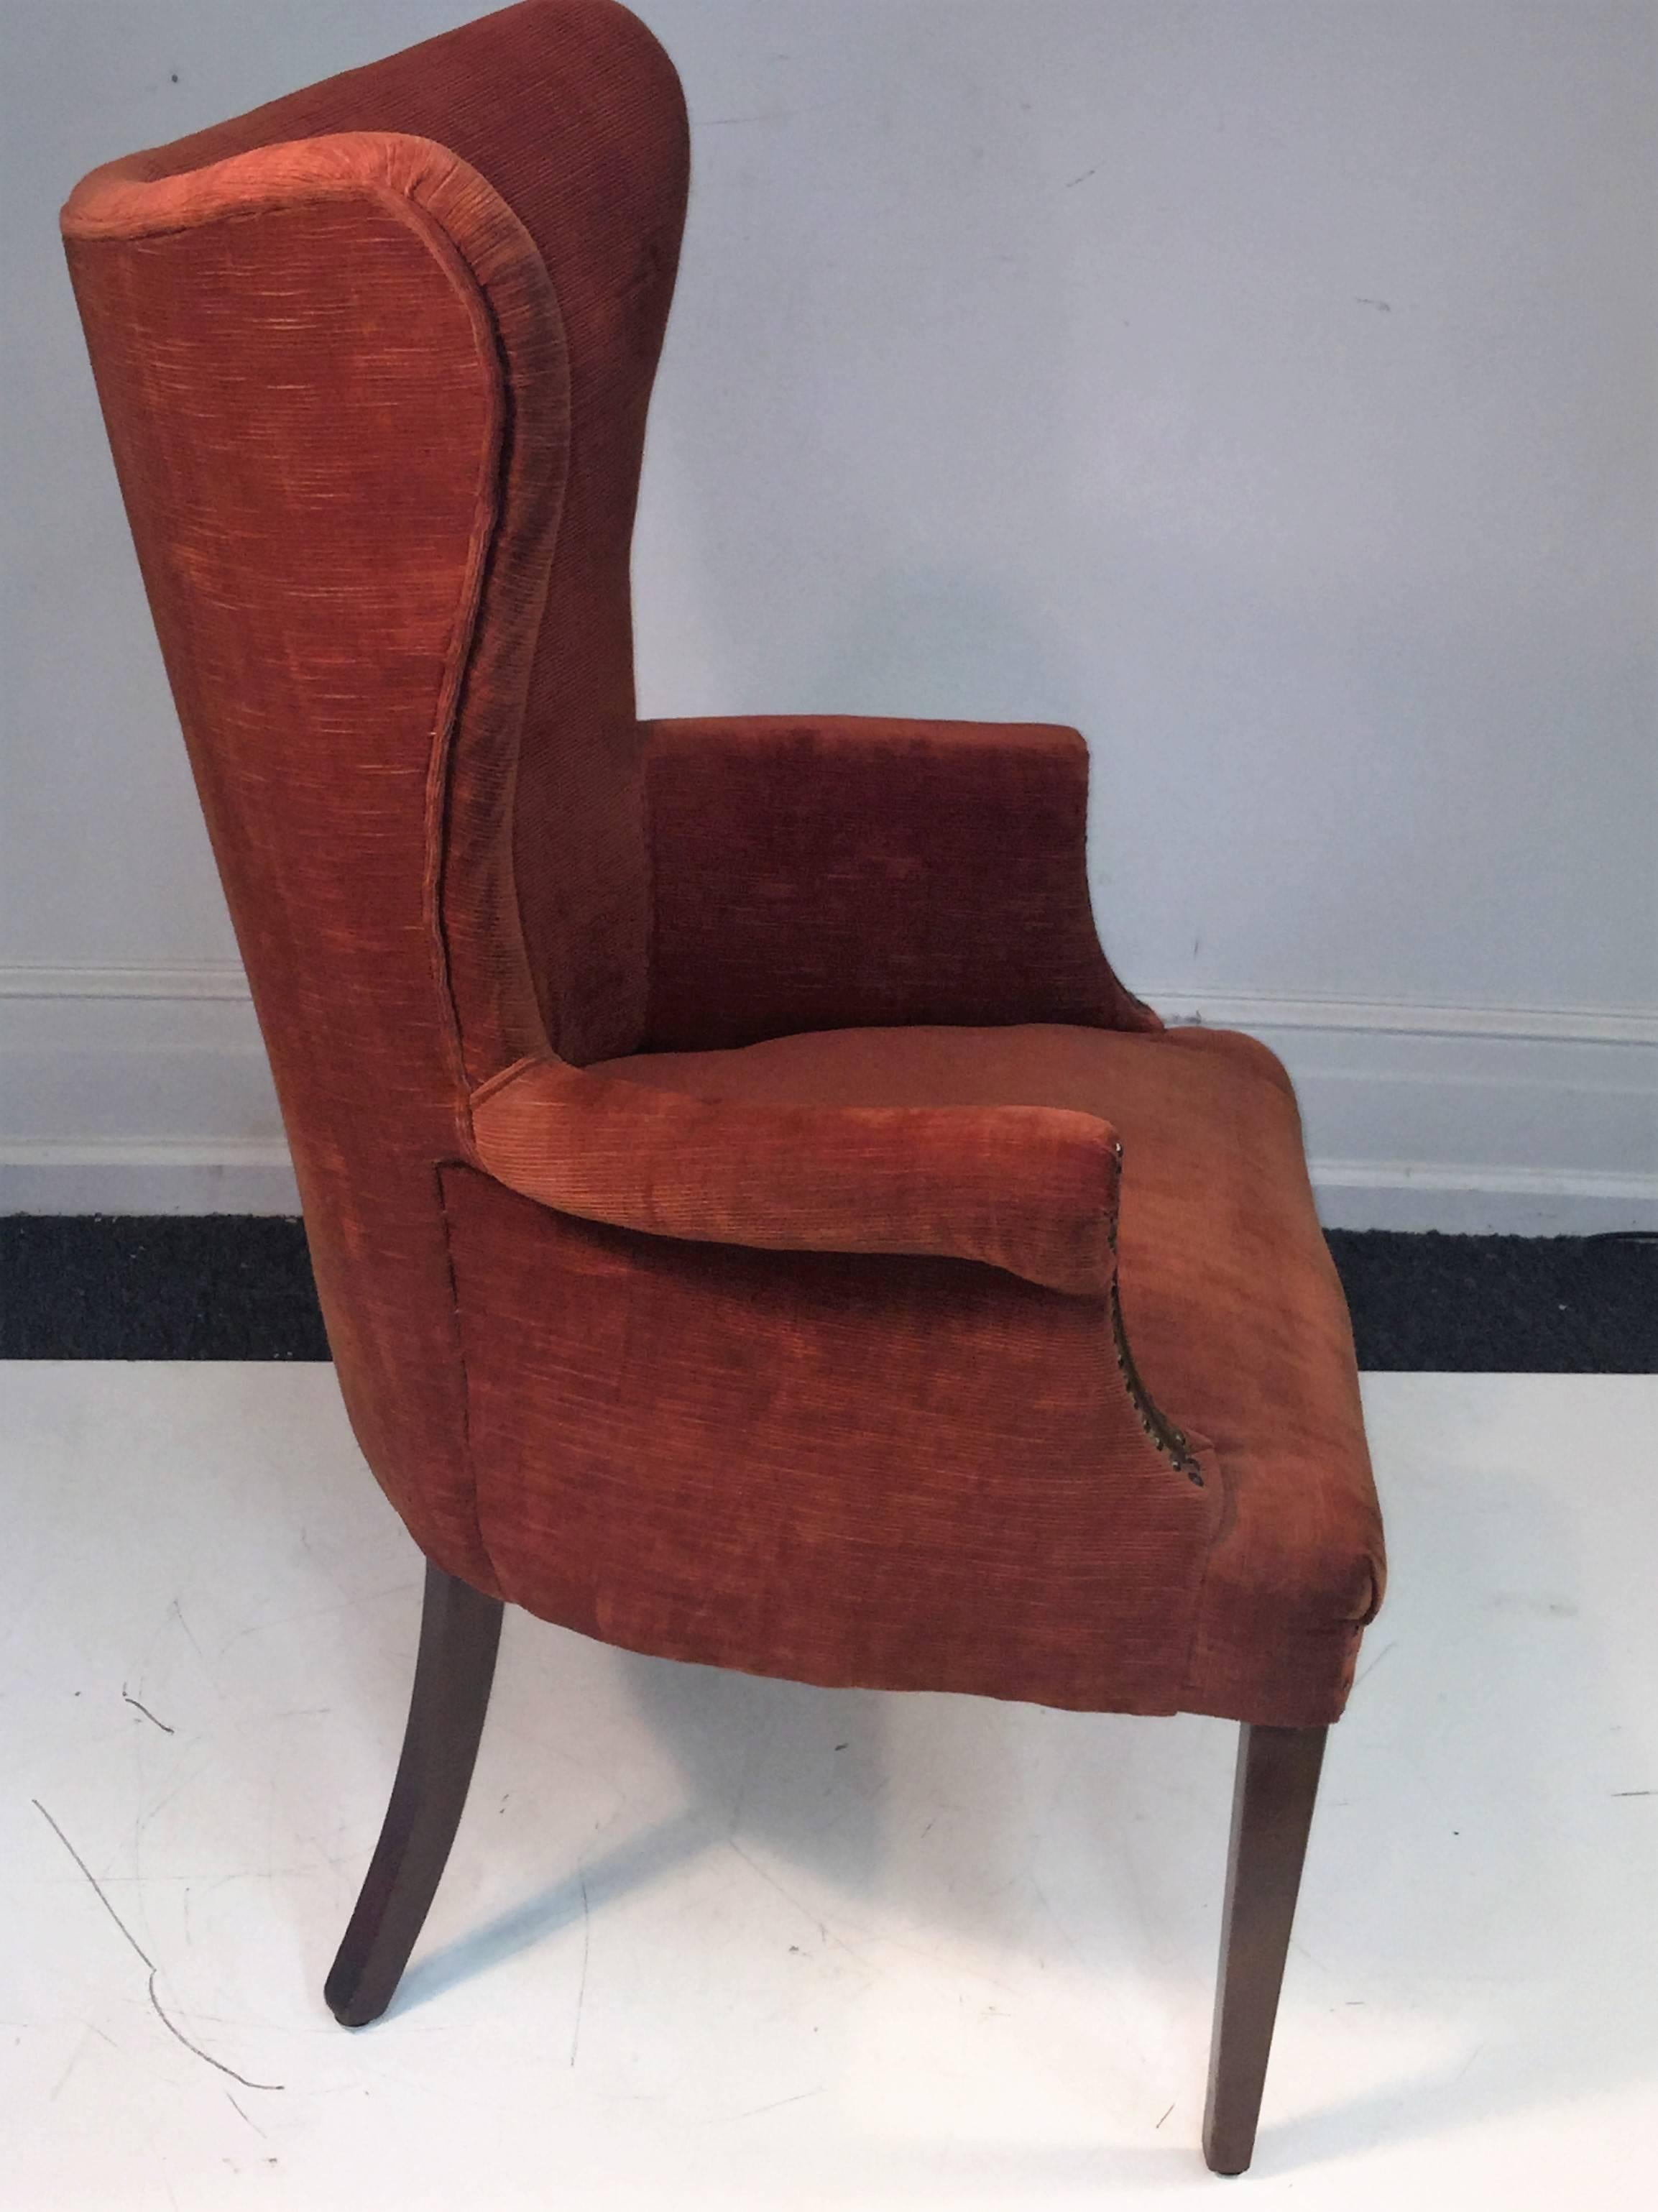 Fantastic design armchairs that have elements of the Hans Wegner papa chair styling. These large stylish armchairs would be incredible in a great fabric. I recommend reupholstery and refinishing as these chairs are a jewel just needing the